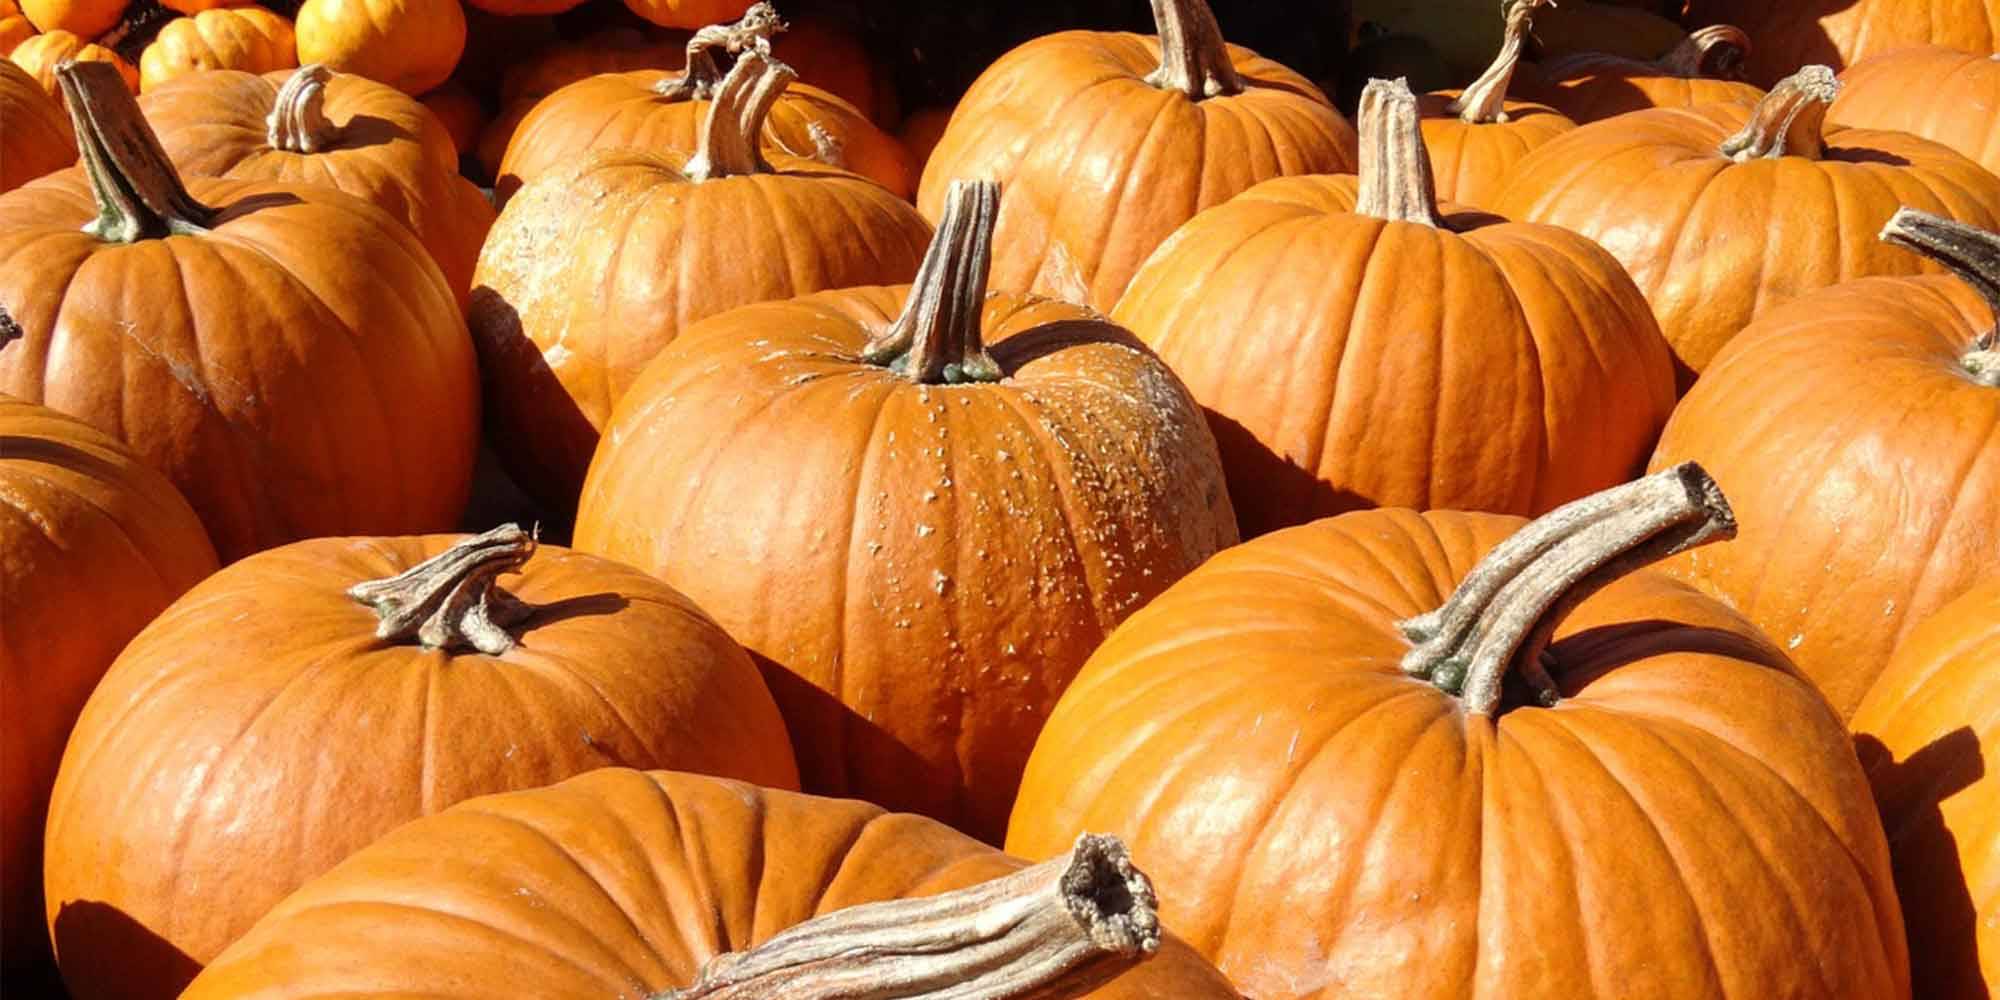 Pick-Your-Own Pumpkins in Our U-Pick Pumpkin Patch this fall in Fortville, Indiana